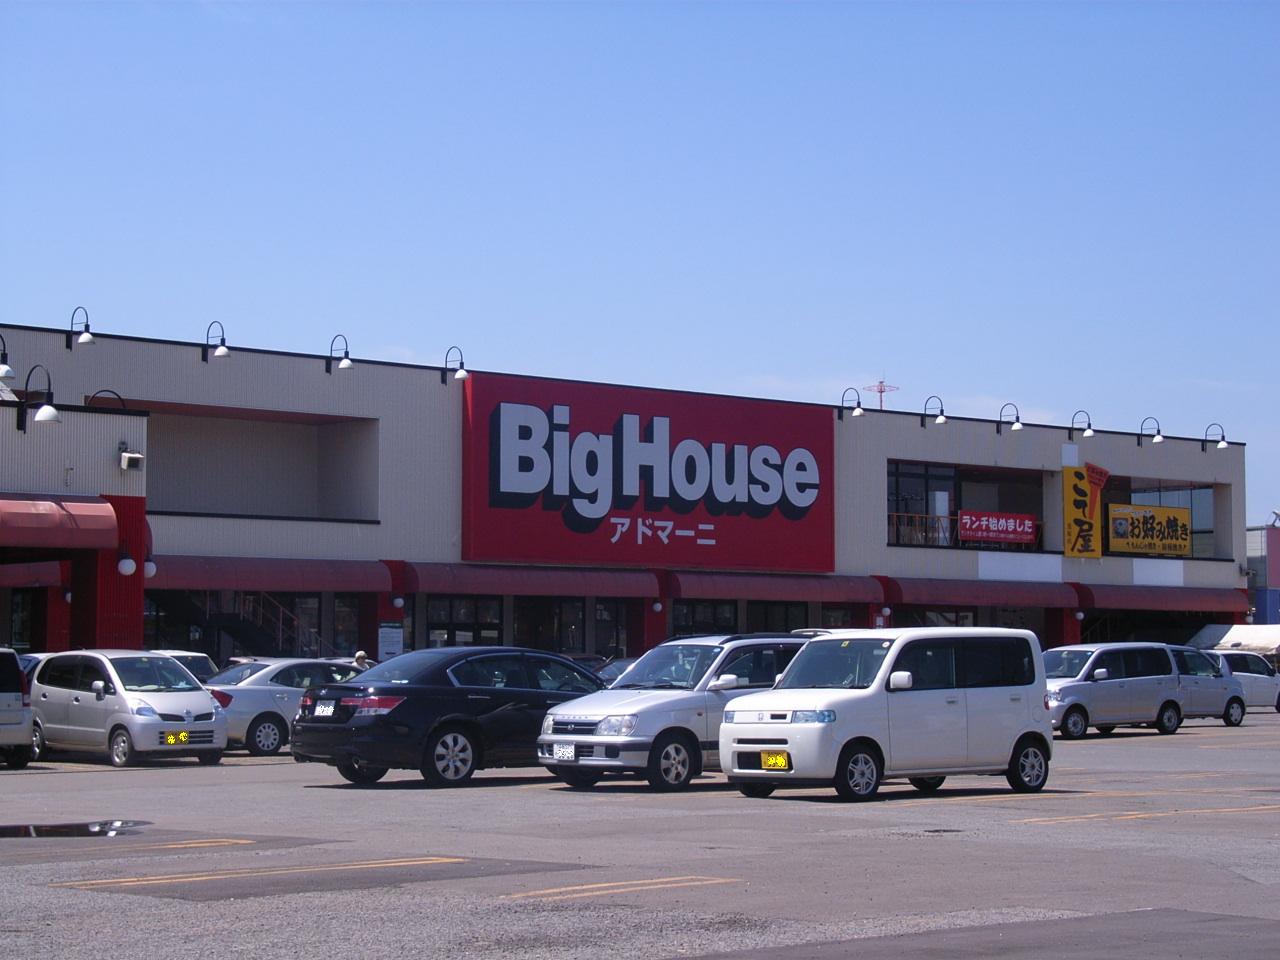 Supermarket. Big House A ・ Domani Mihara store up to (super) 667m